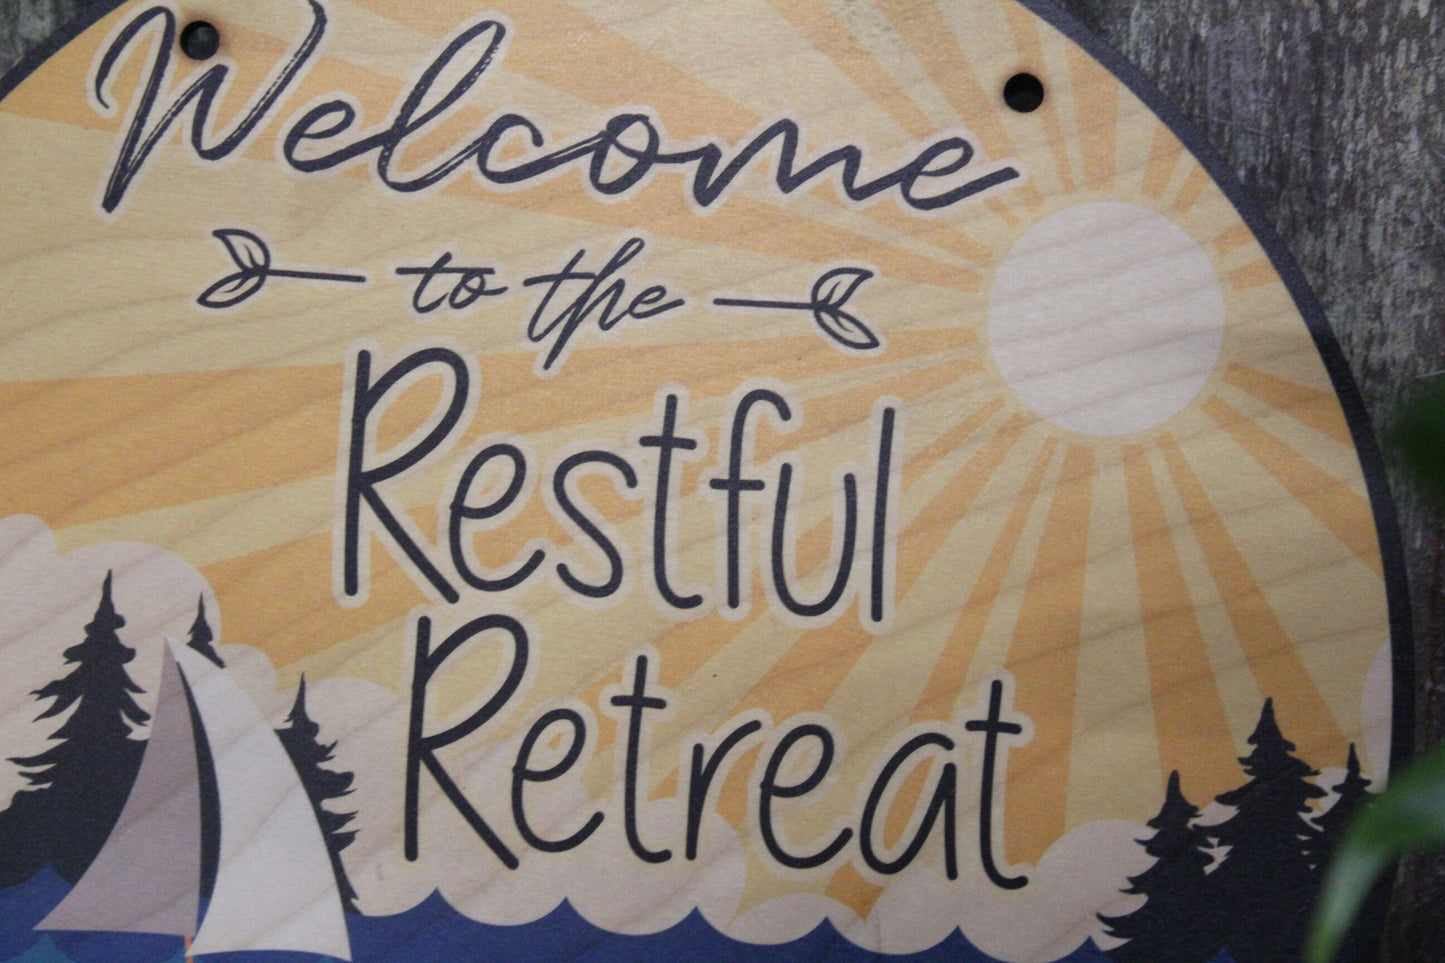 Small Business Sign Beach Restful Retreat Relax Logo Your Actual Logo Round Sign Custom Circle Personalized Plaque Wall Art Color Wood Print